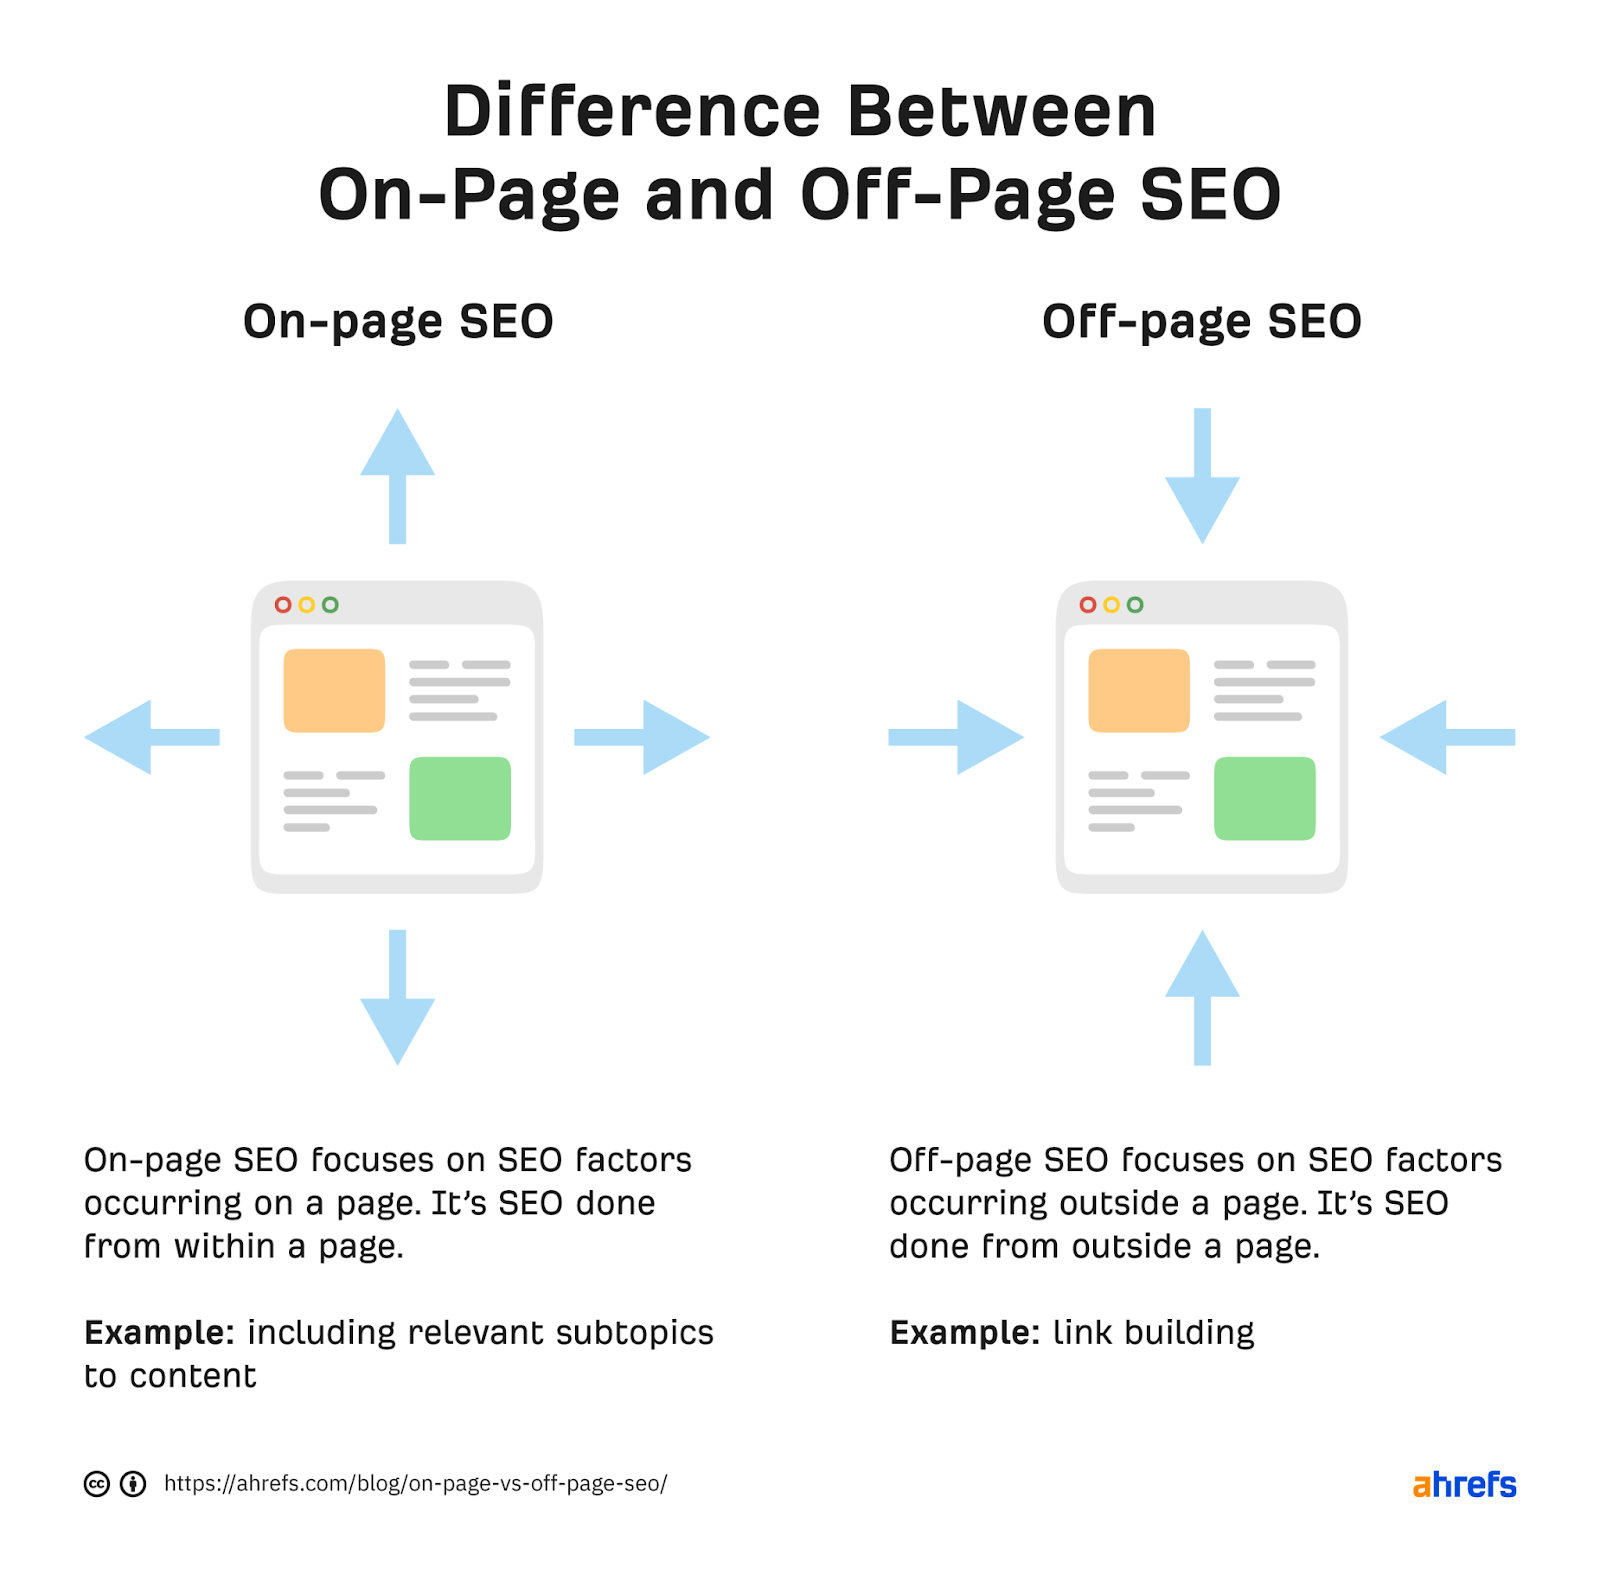 Infographic illustrating differences between on-page and off-page SEO